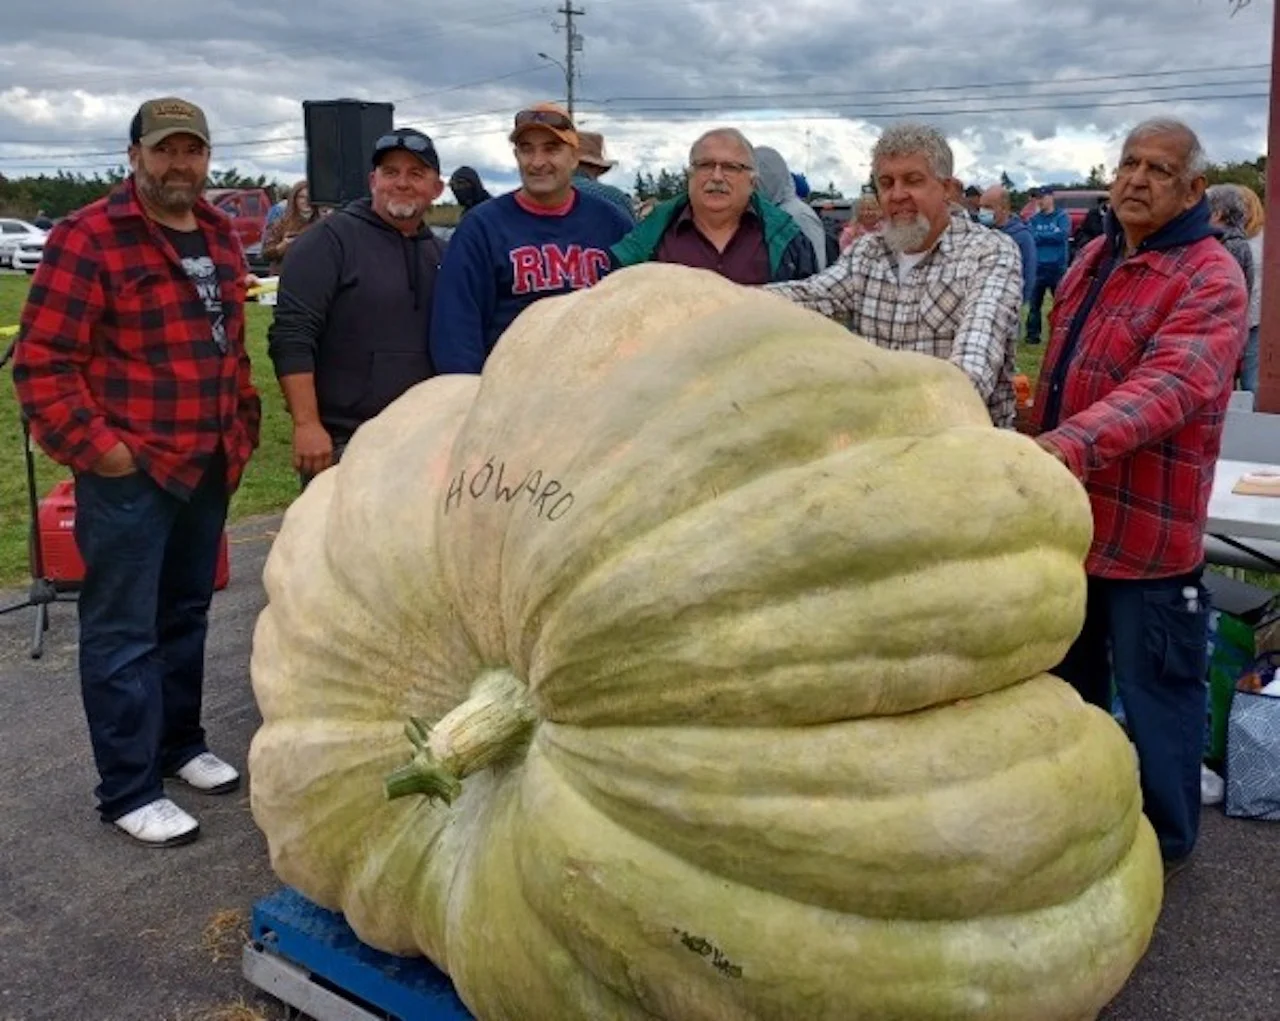 Atlantic Canada record set for largest pumpkin, just shy of national